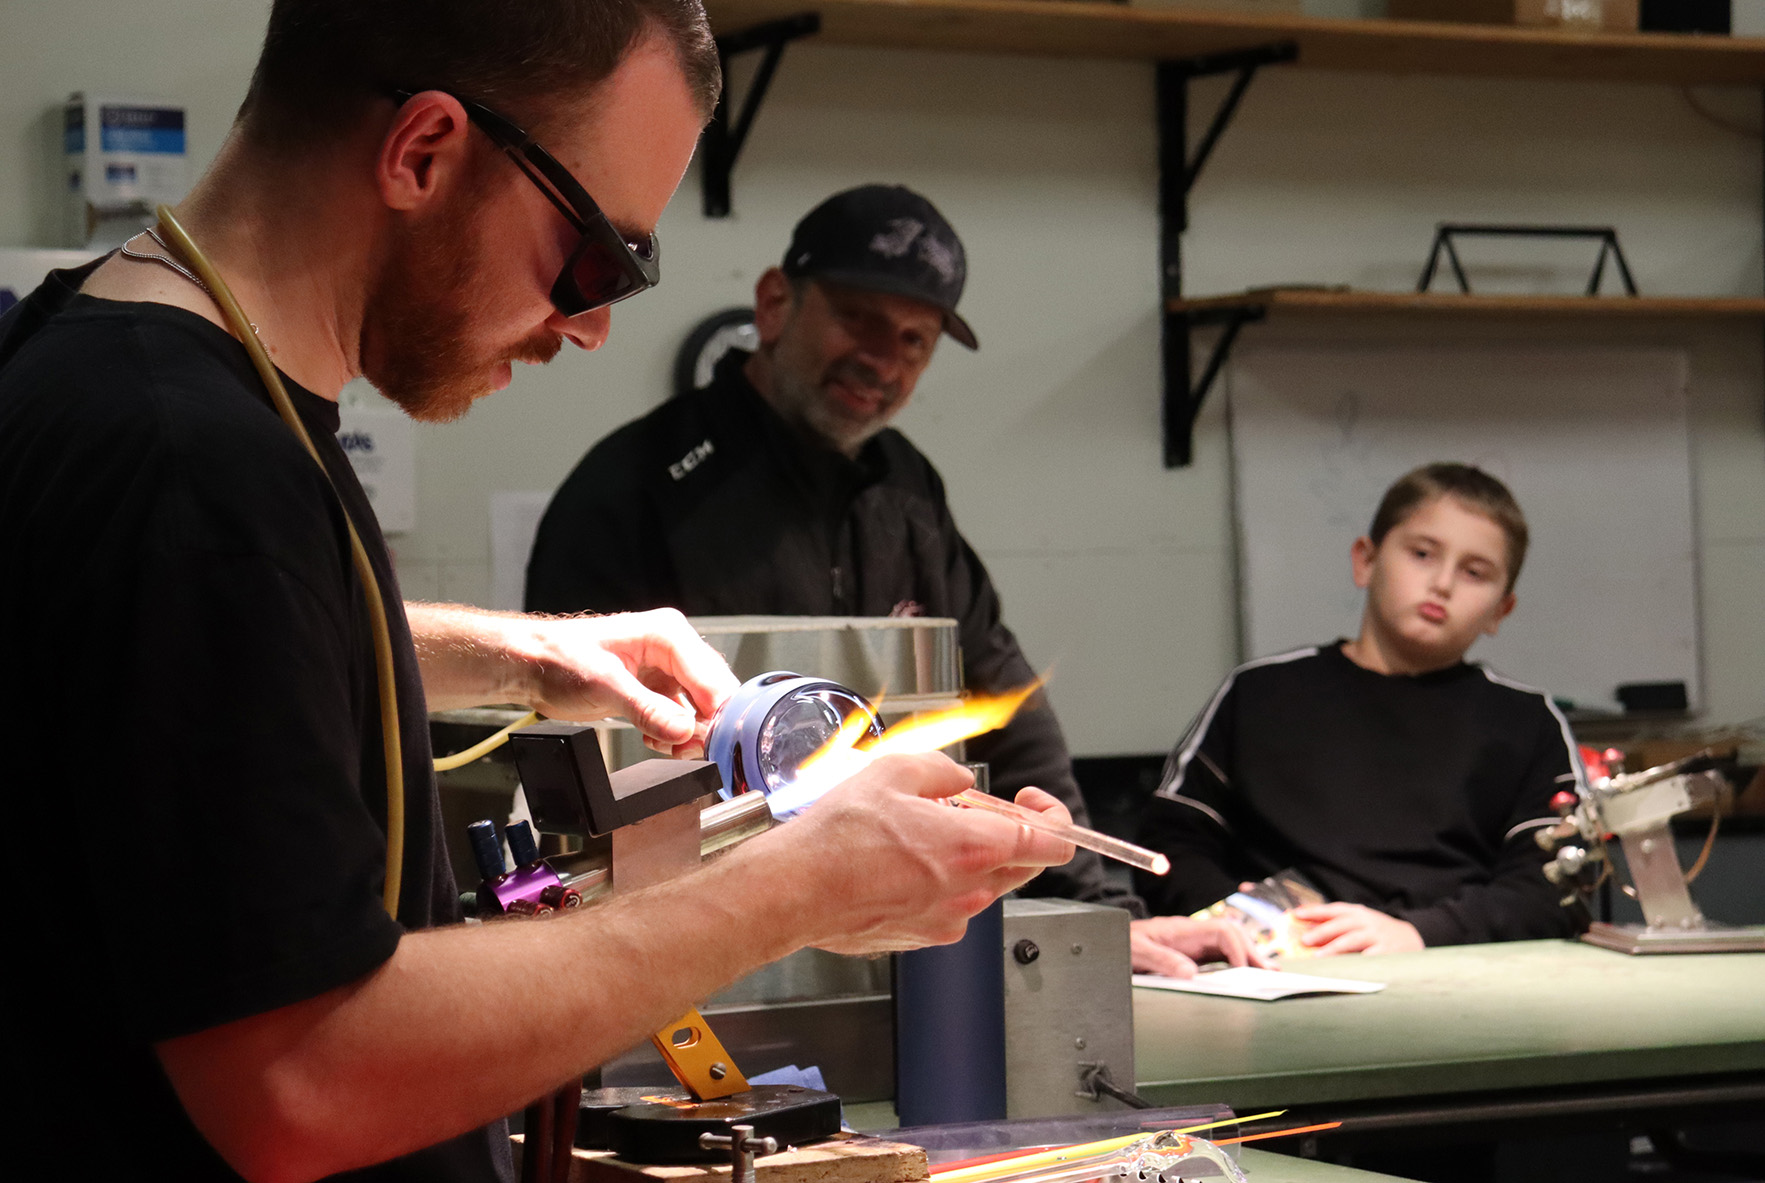 Glass artist working at a table while a father and son watch in the background